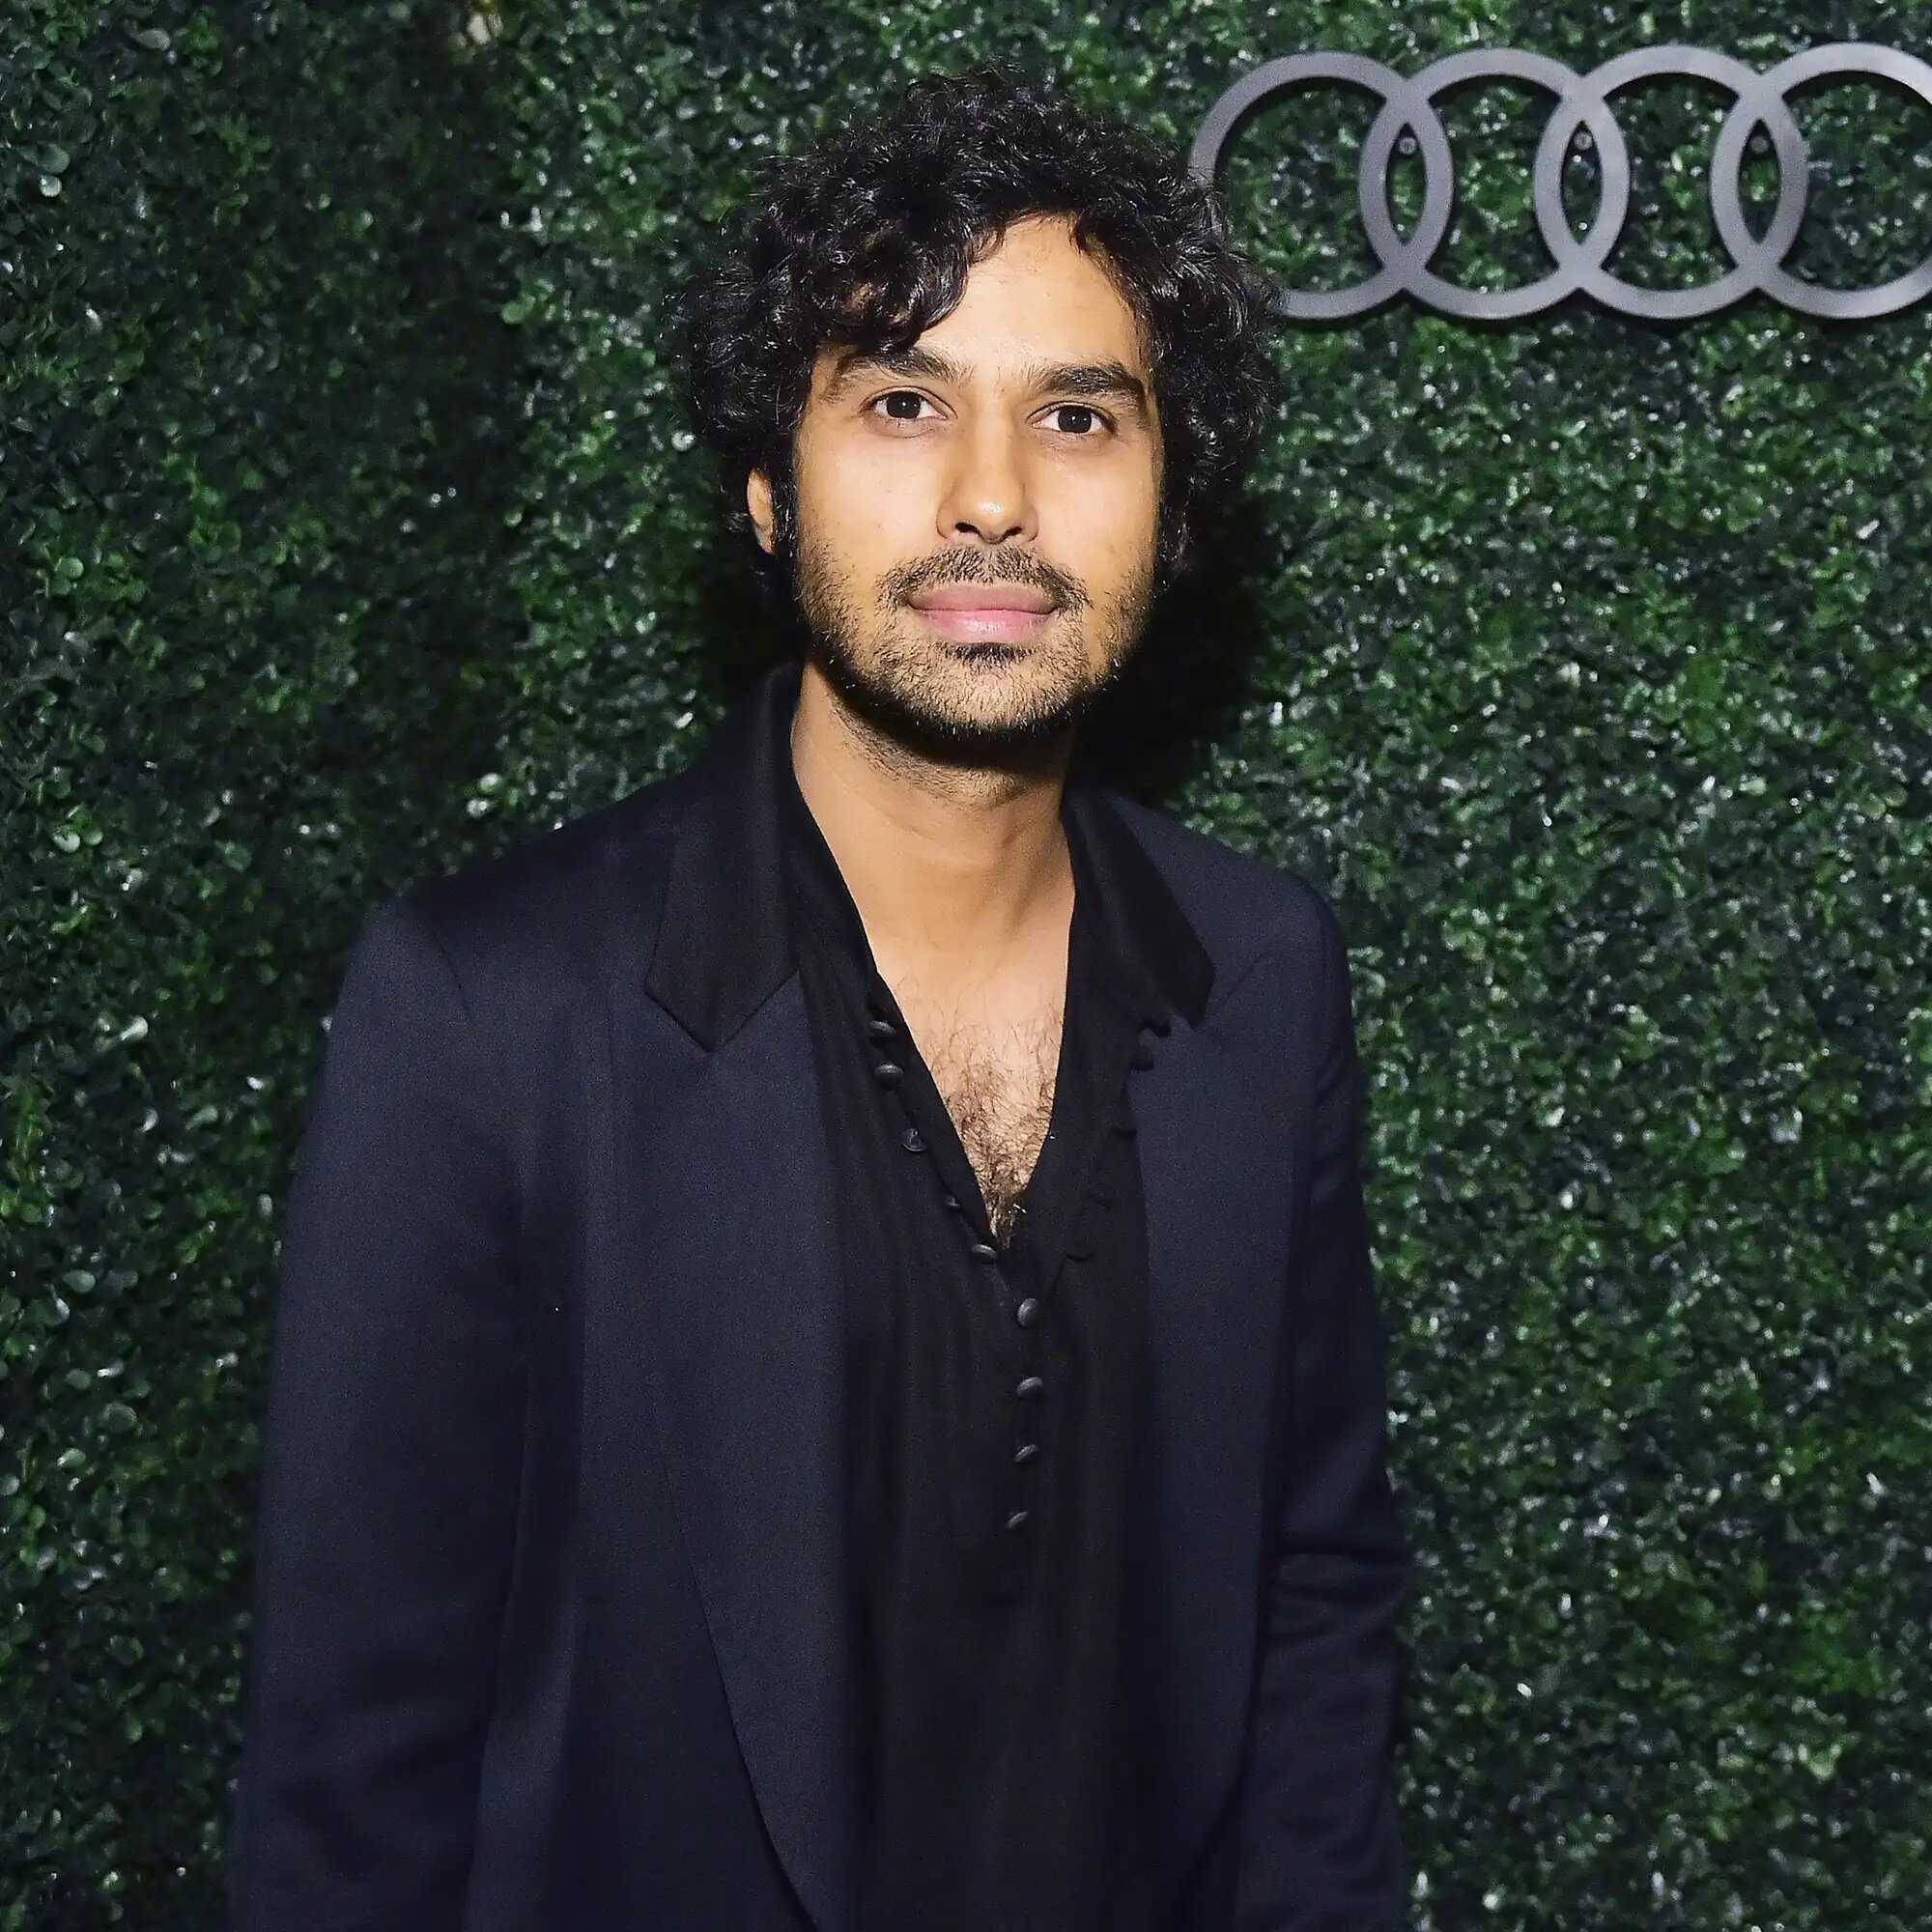 'Welcome to Hollywood': When Kunal Nayyar shed light on Johnny Galecki's gum wall and 'The Big Bang Theory' secrets